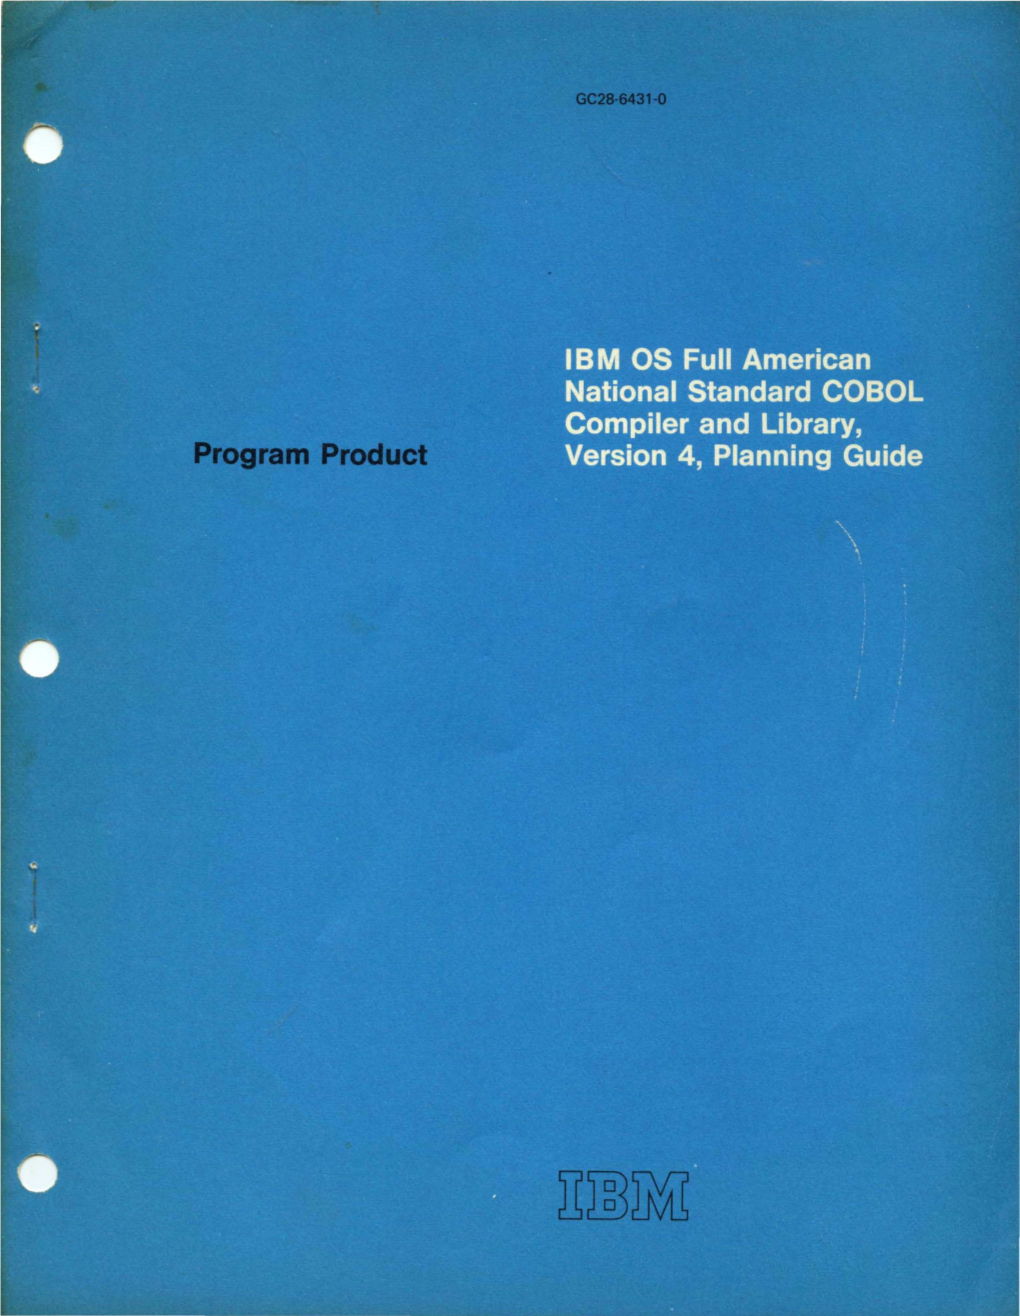 IBM As Full American National Standard COBOL Compiler and Library, Program Product Version 4, Planning Guide